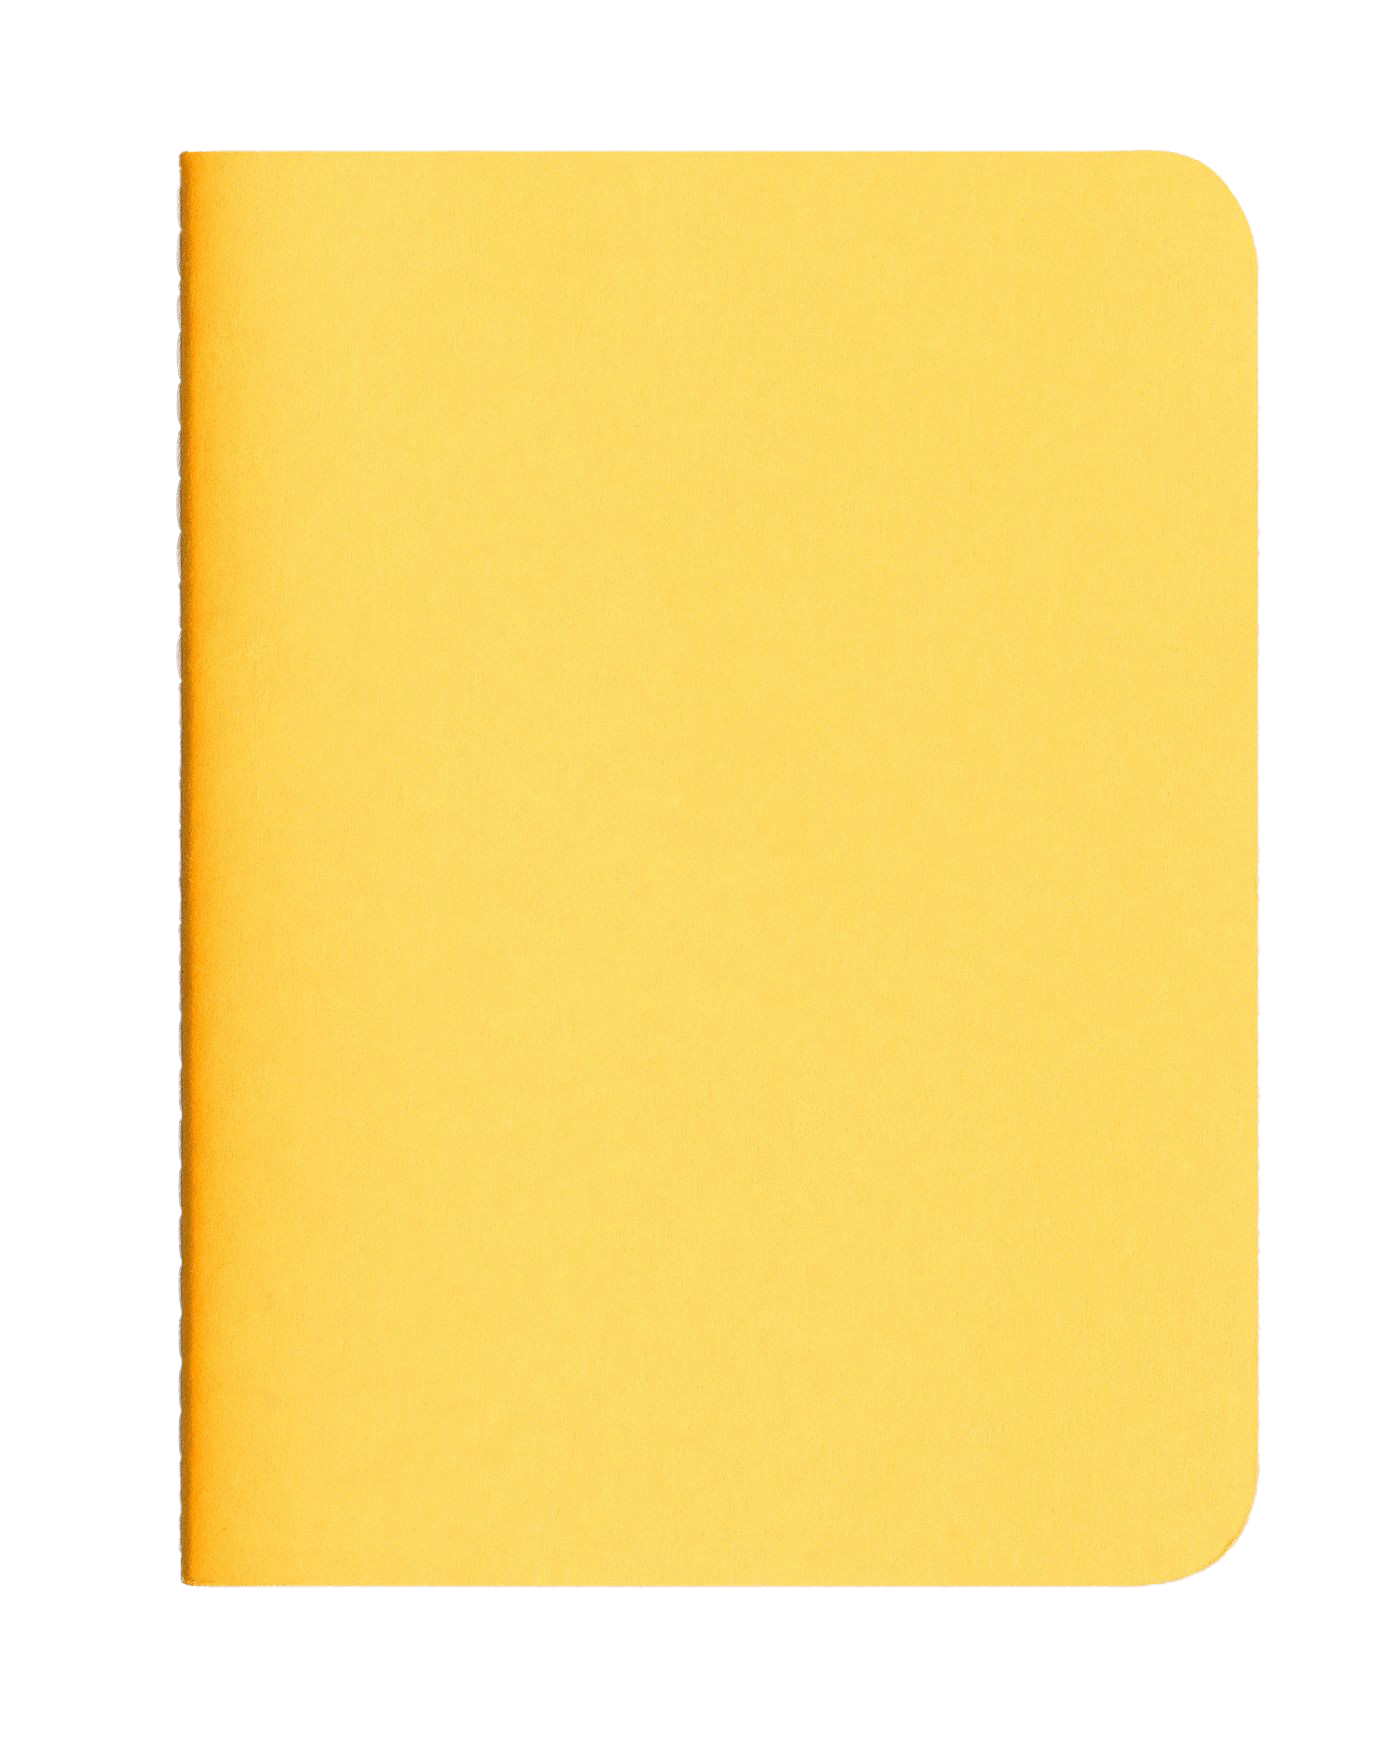 Blank Book Cover PNG Image